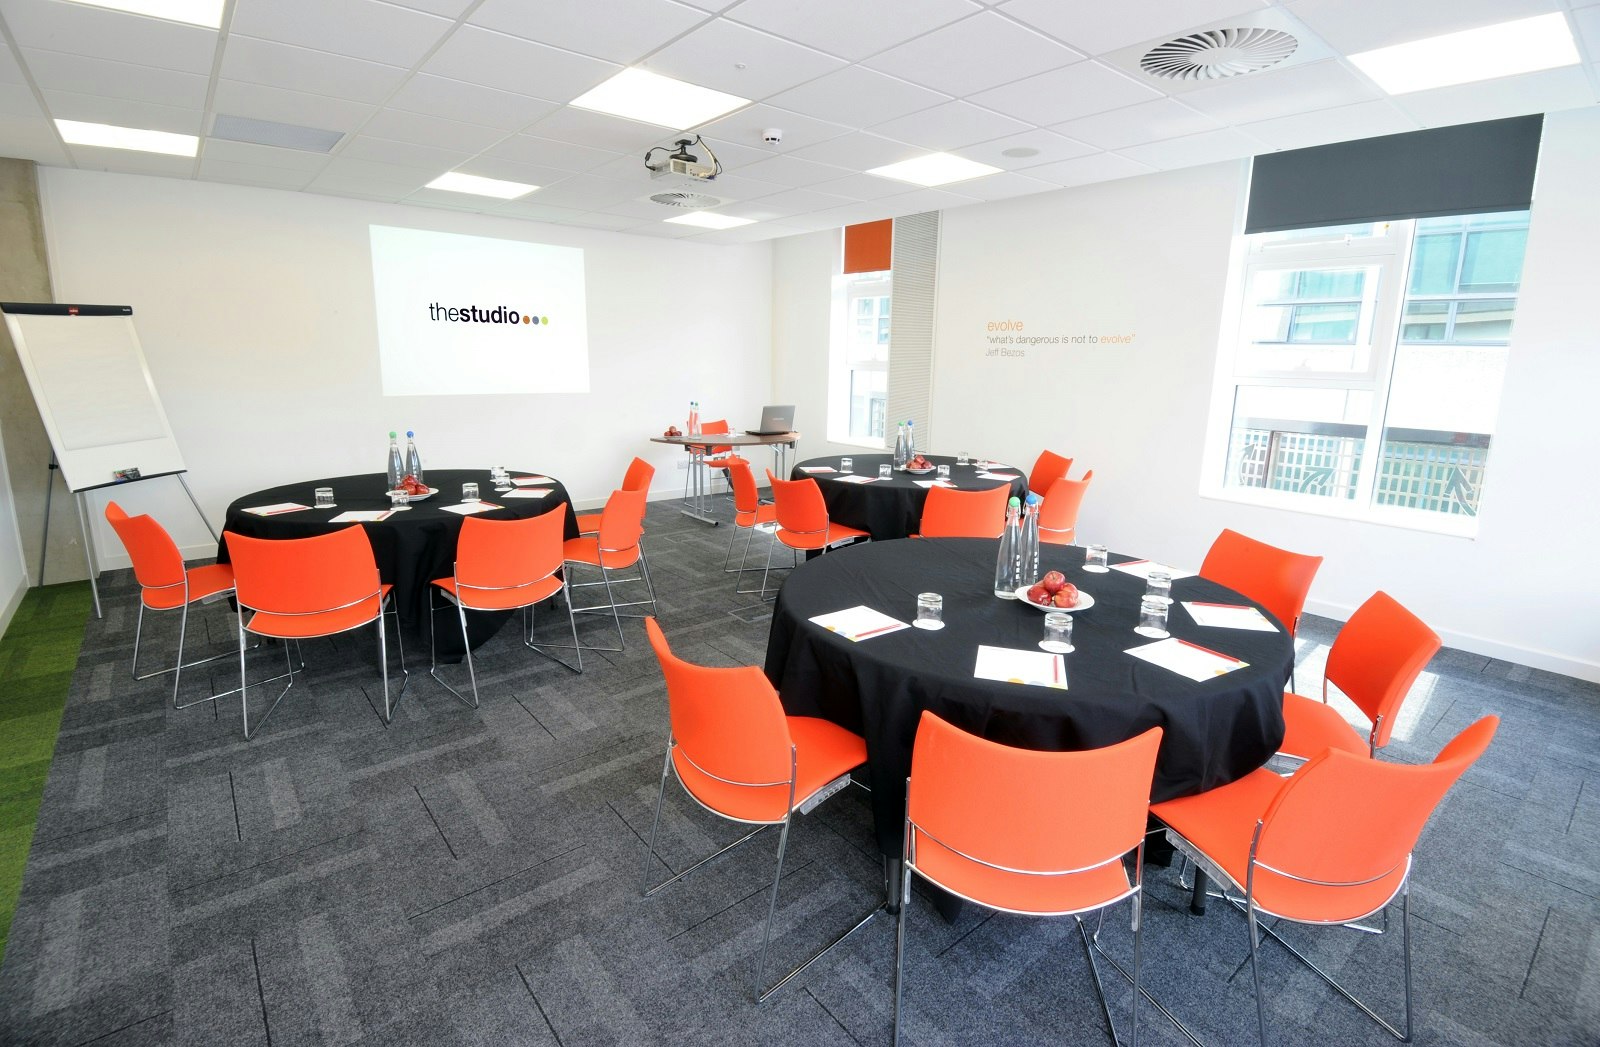 Private Function Rooms Venues in Manchester - thestudio Manchester